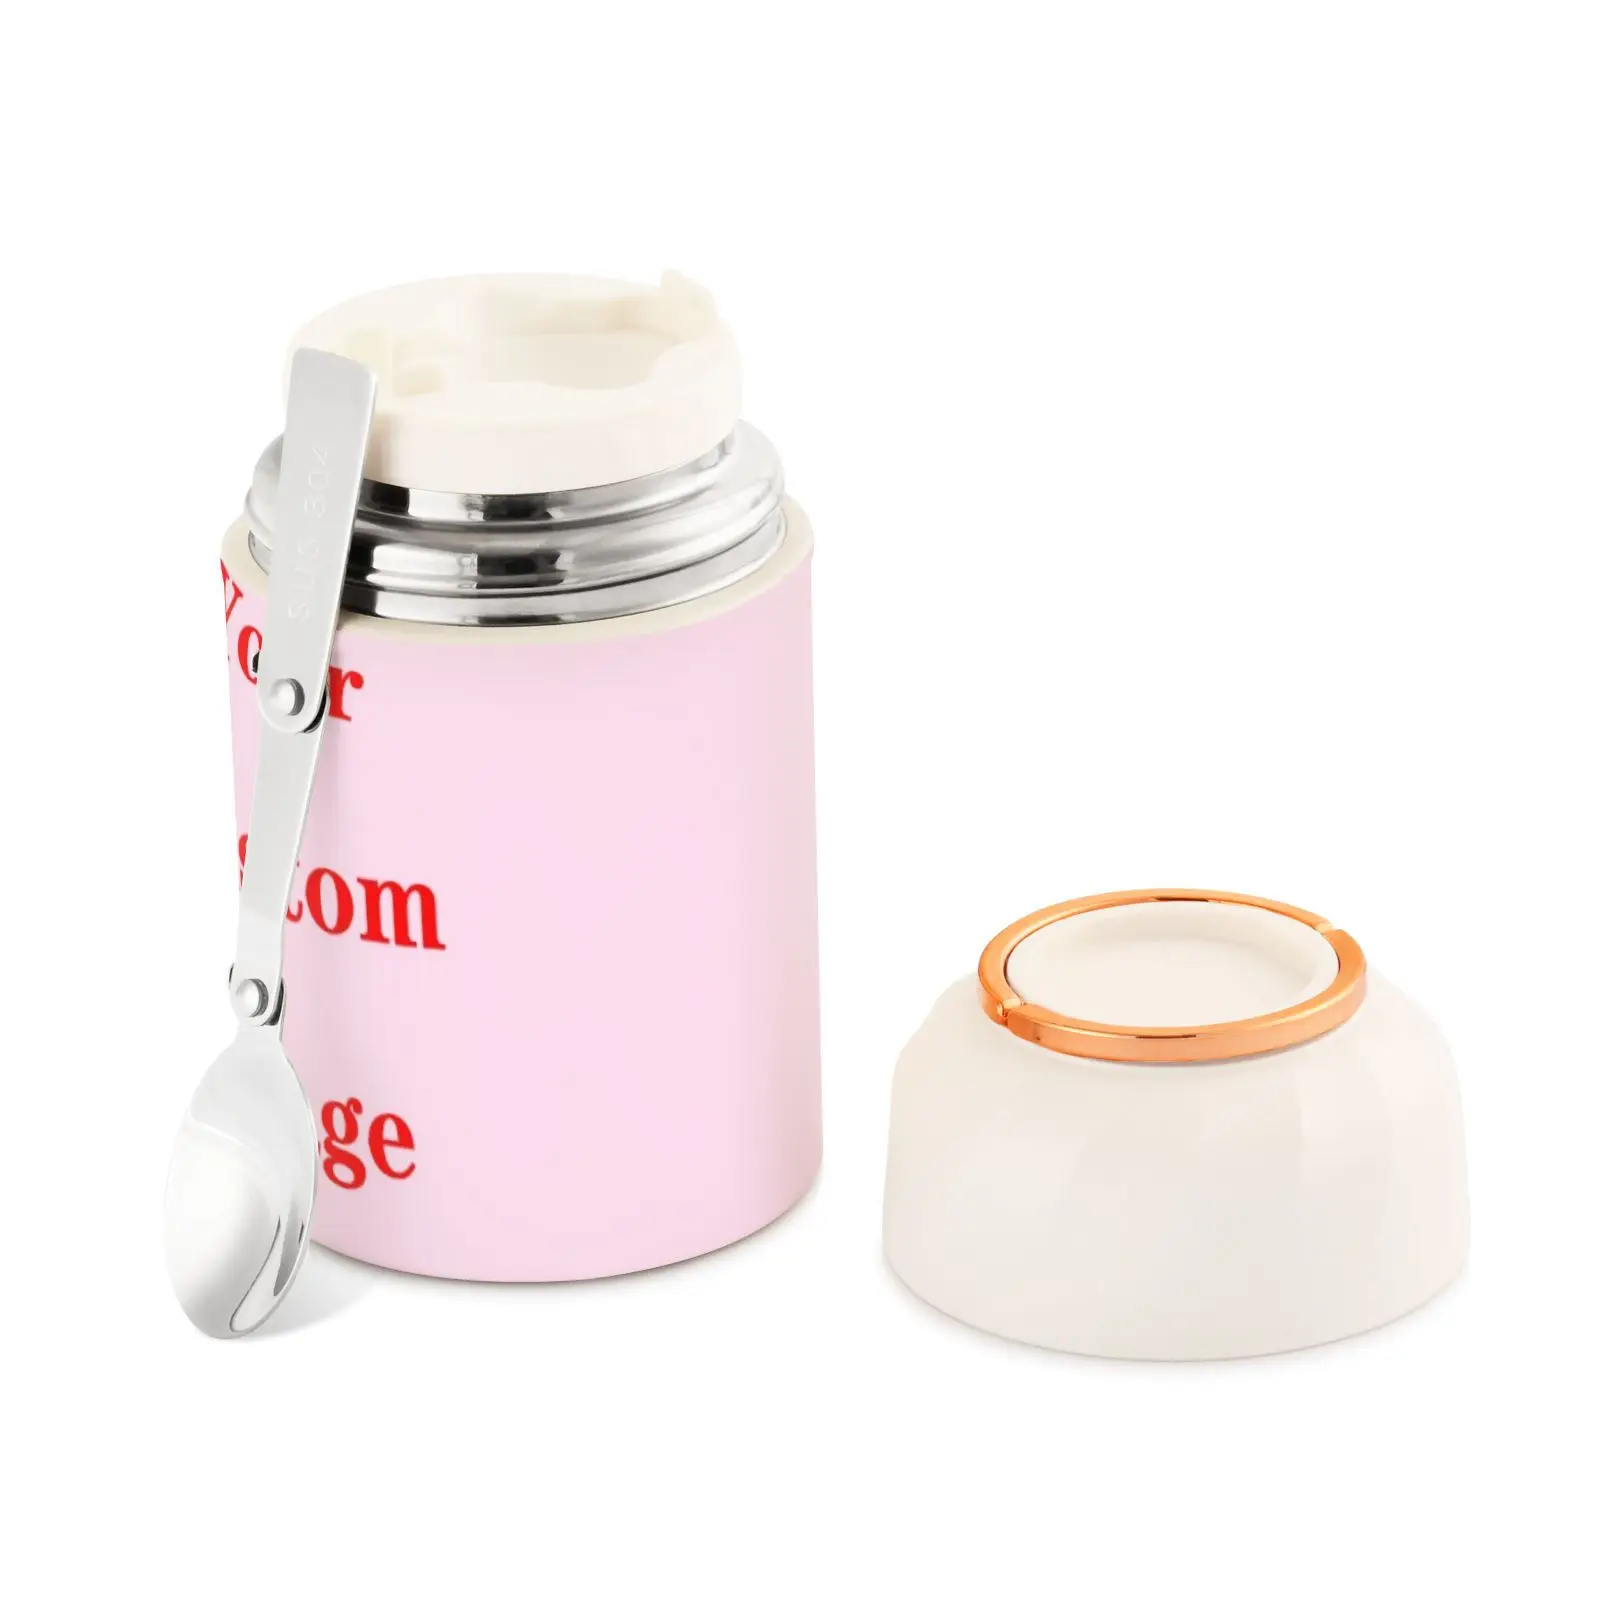 https://ae01.alicdn.com/kf/S46e7a6a5d7cd43e98d43e114a0b34746q/Stainless-Steel-Custom-Thermal-Lunch-Box-Insulated-Lunch-Bag-Food-Warmer-Soup-Cup-Thermos-Containers-Bento.jpg